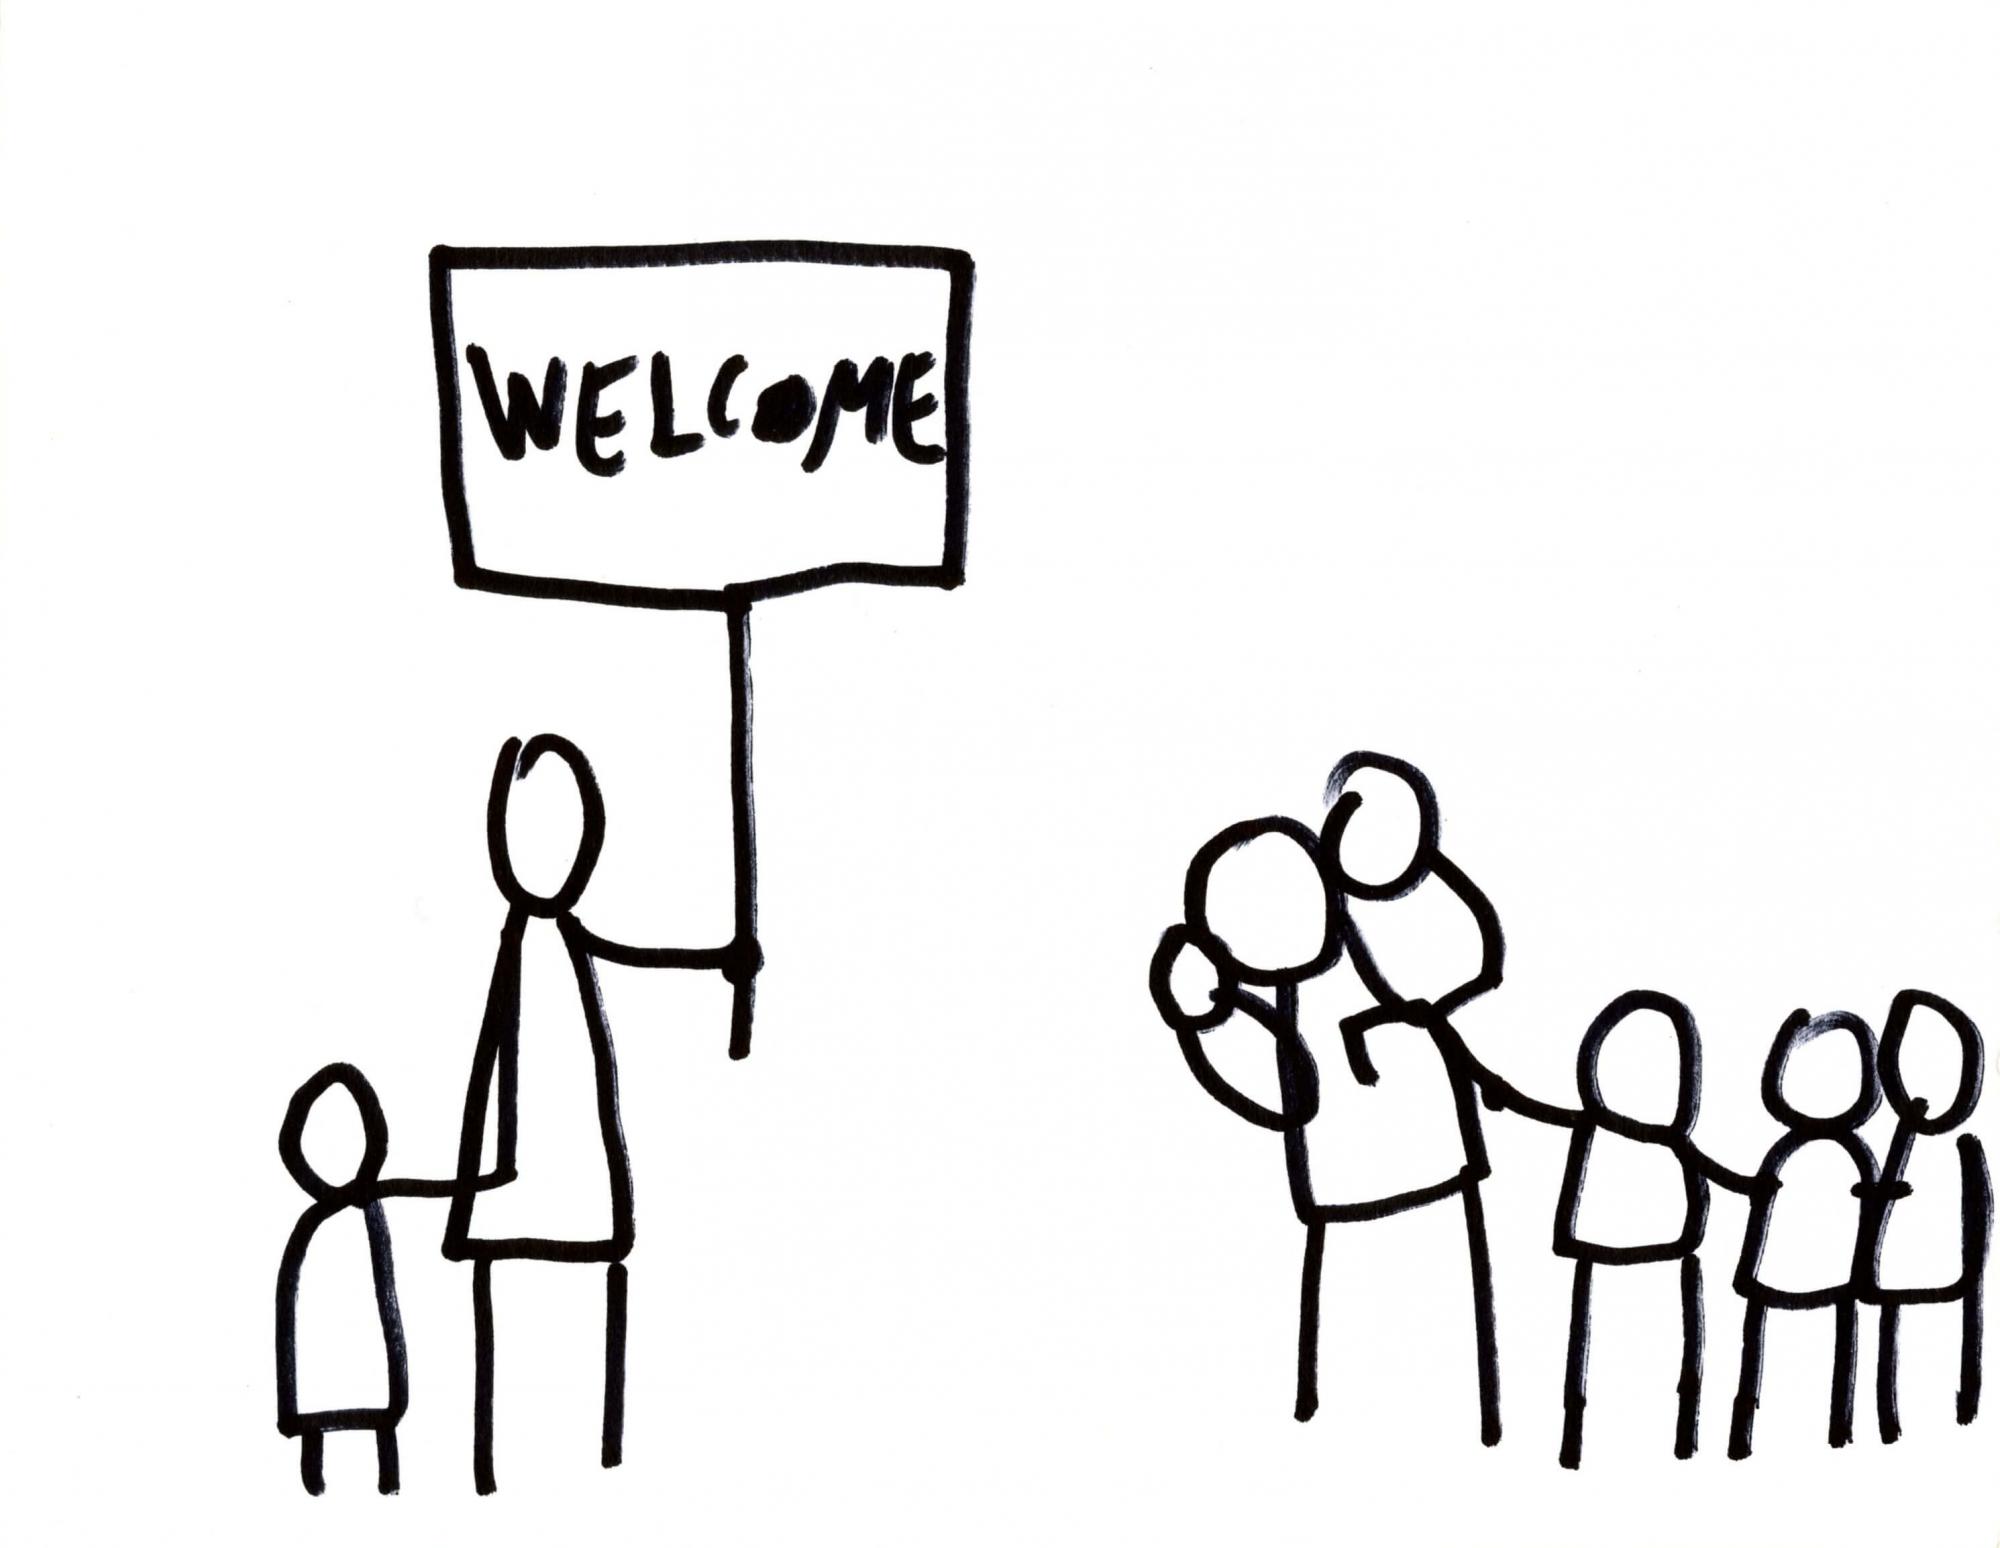 Stick figure drawing depicting and adult and child stading on the left and holding a sign saying "Welcome!" and an adult and four children (one of them on the adult's back) walking toward the other two.